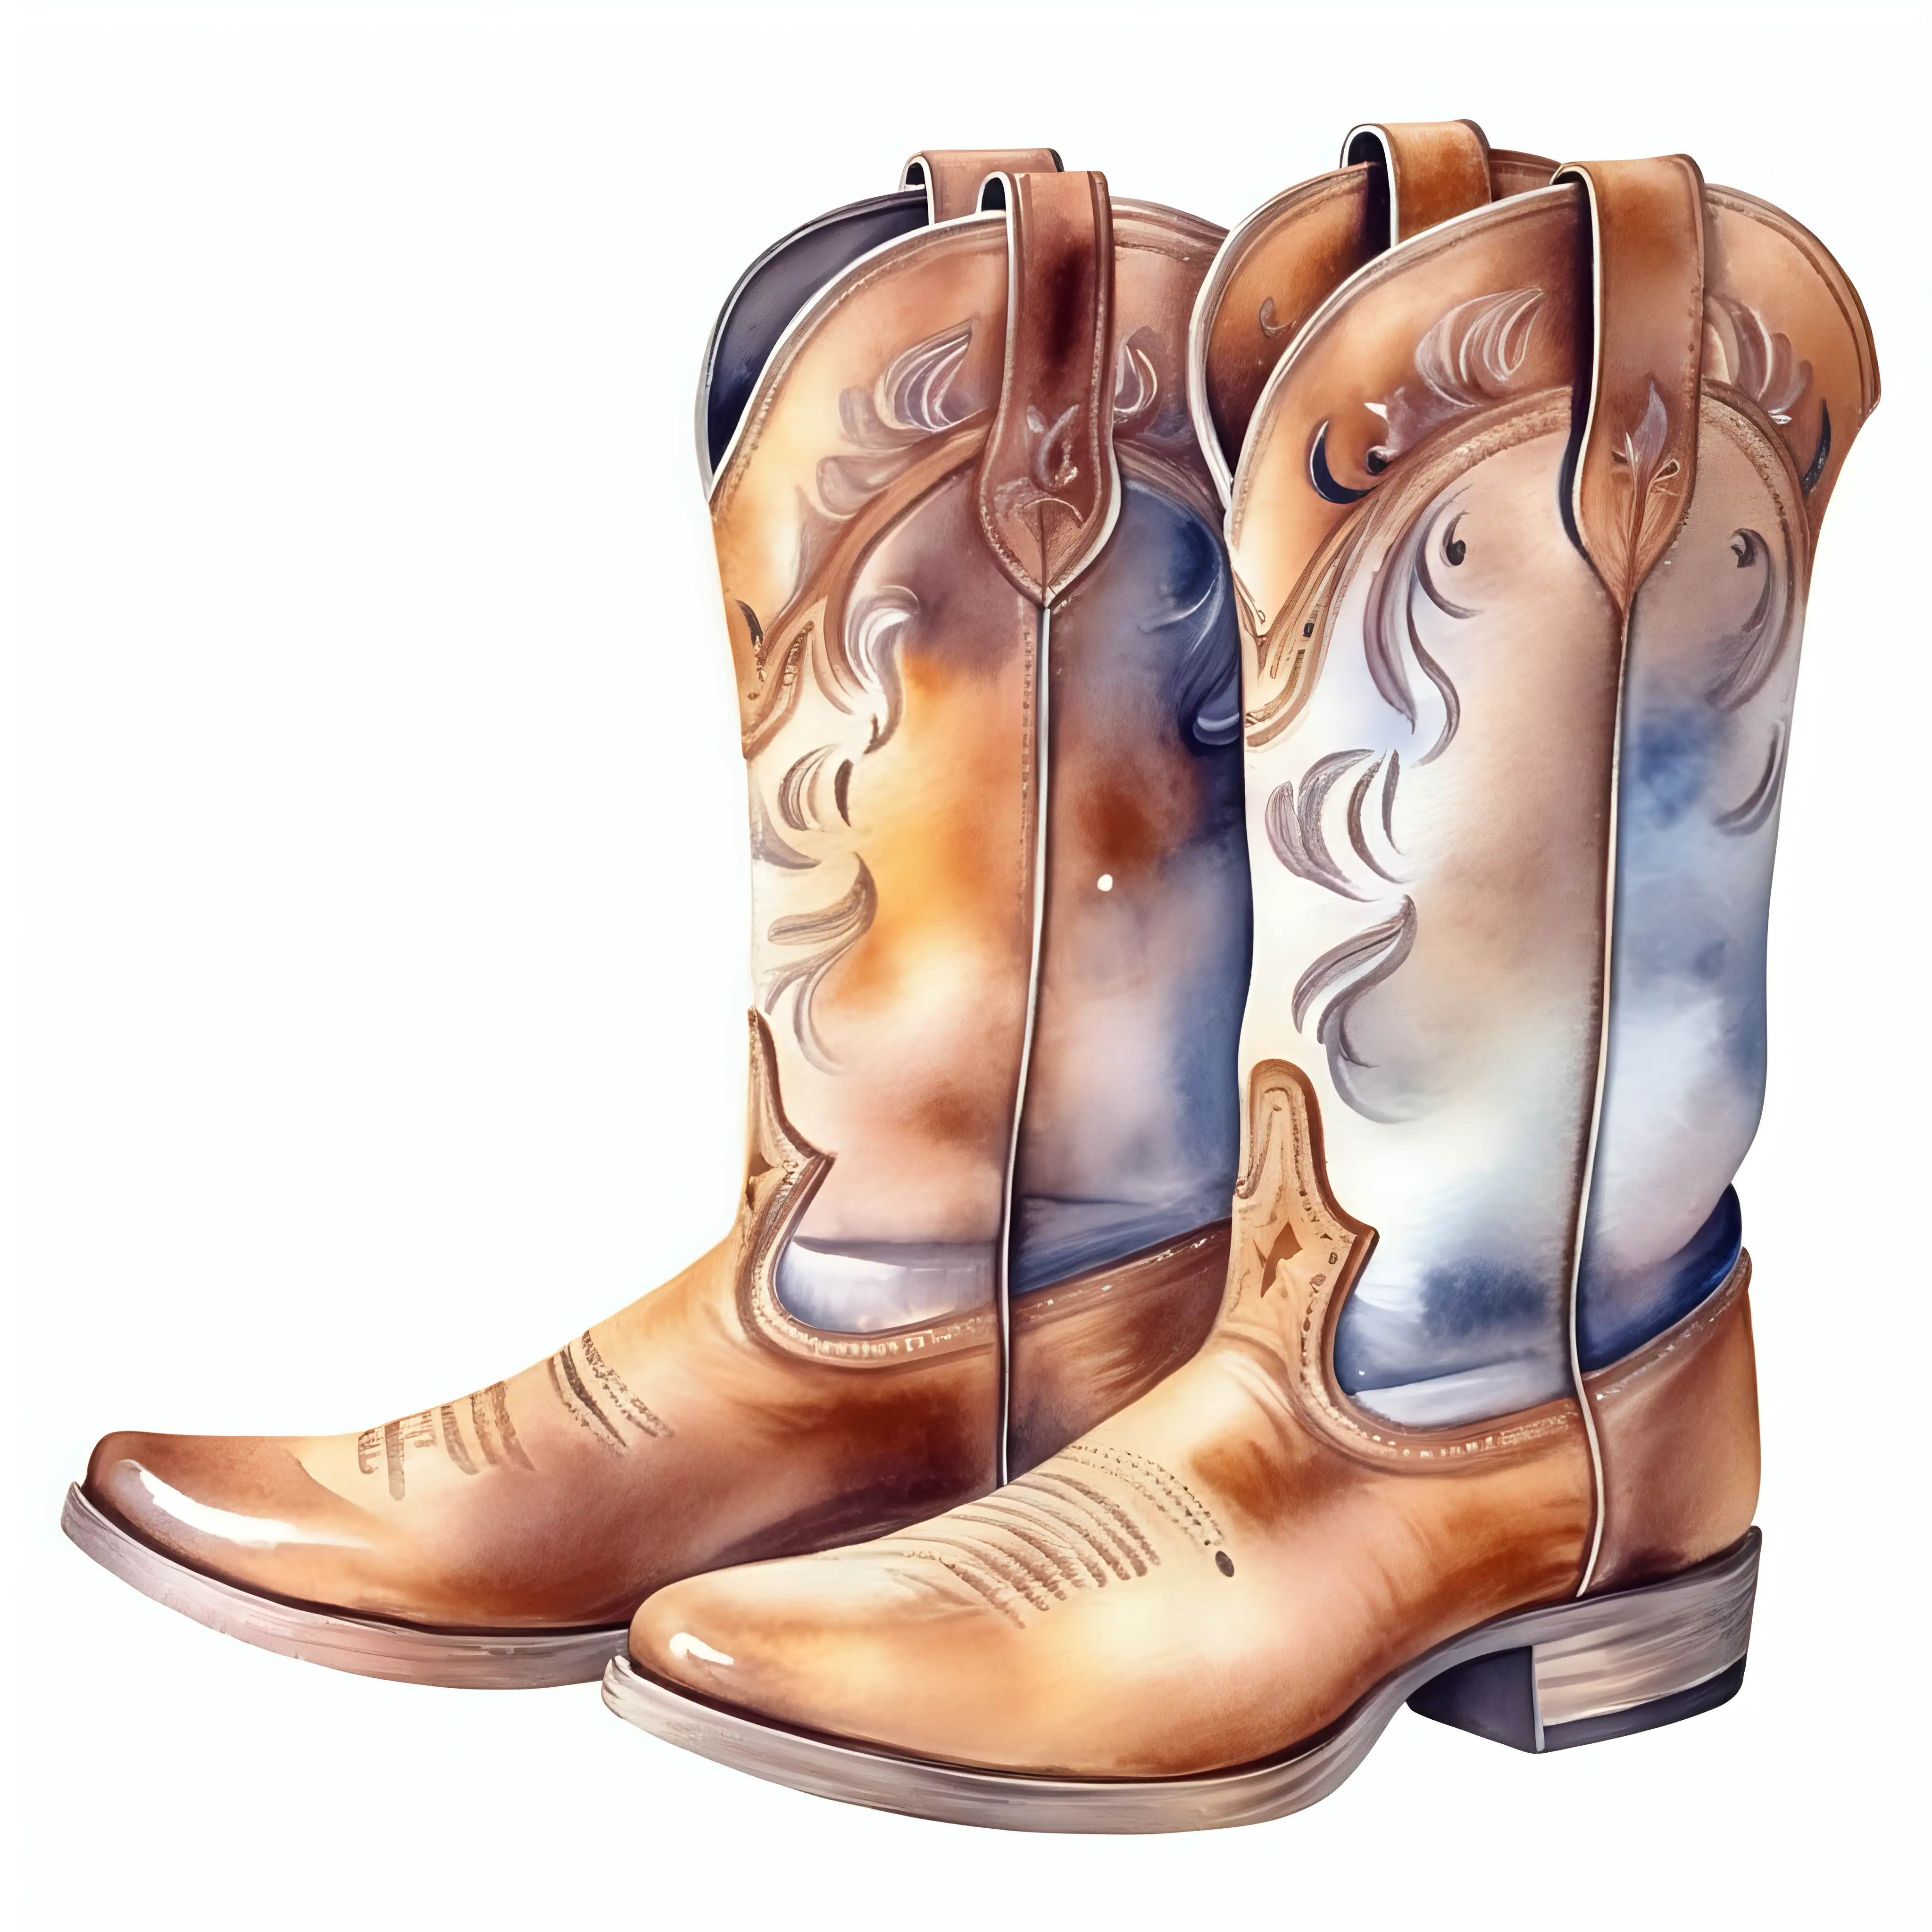 single pair of cowboy boots, watercolor,
 isolated image on white background
